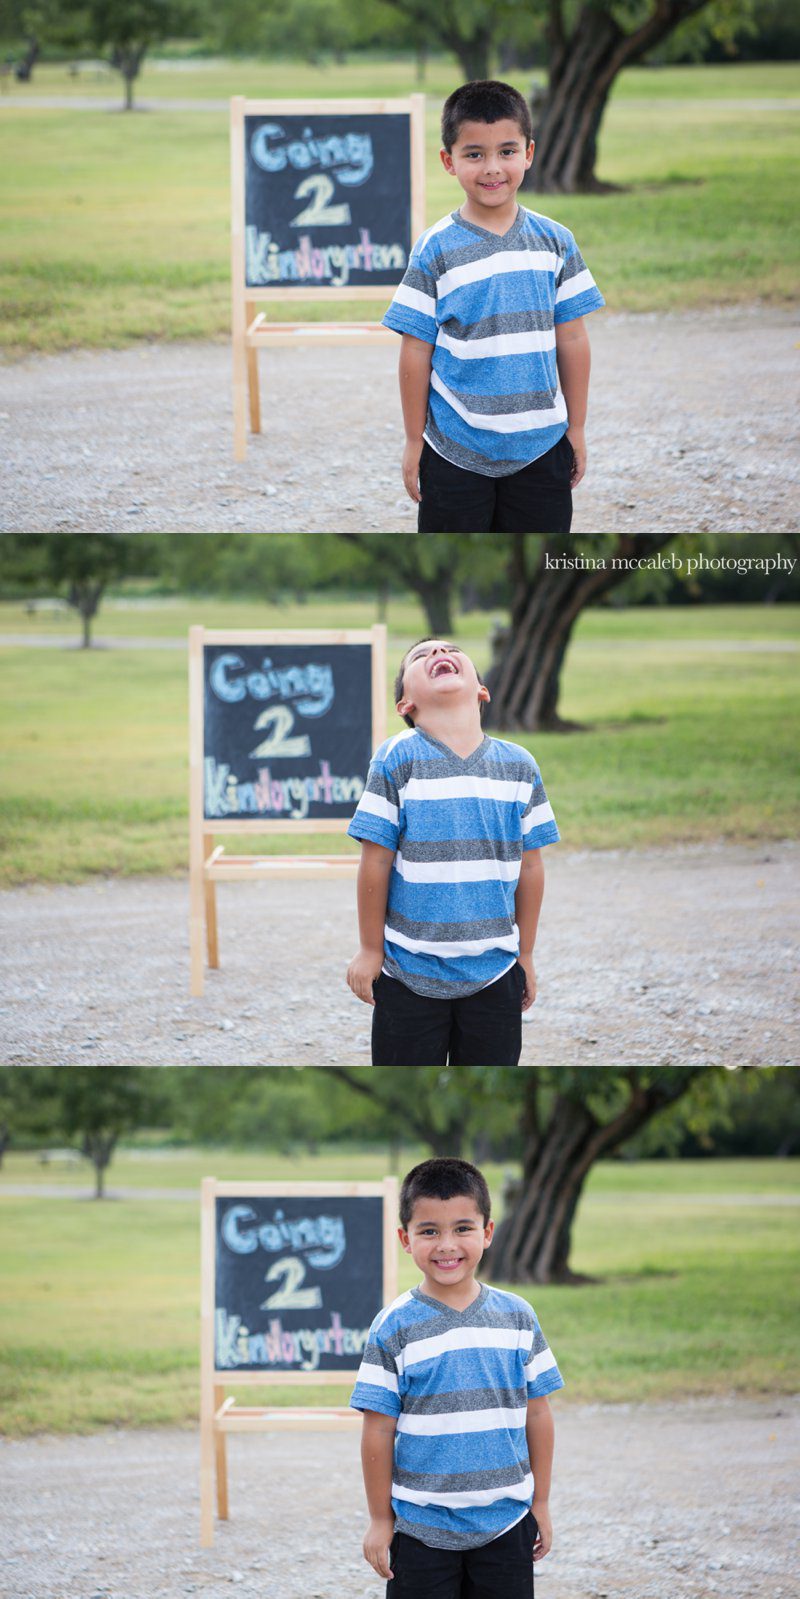 Back to School Mini Sessions - Going to Kindergarten Session - Kristina McCaleb Photography | Dallas Children's Photography